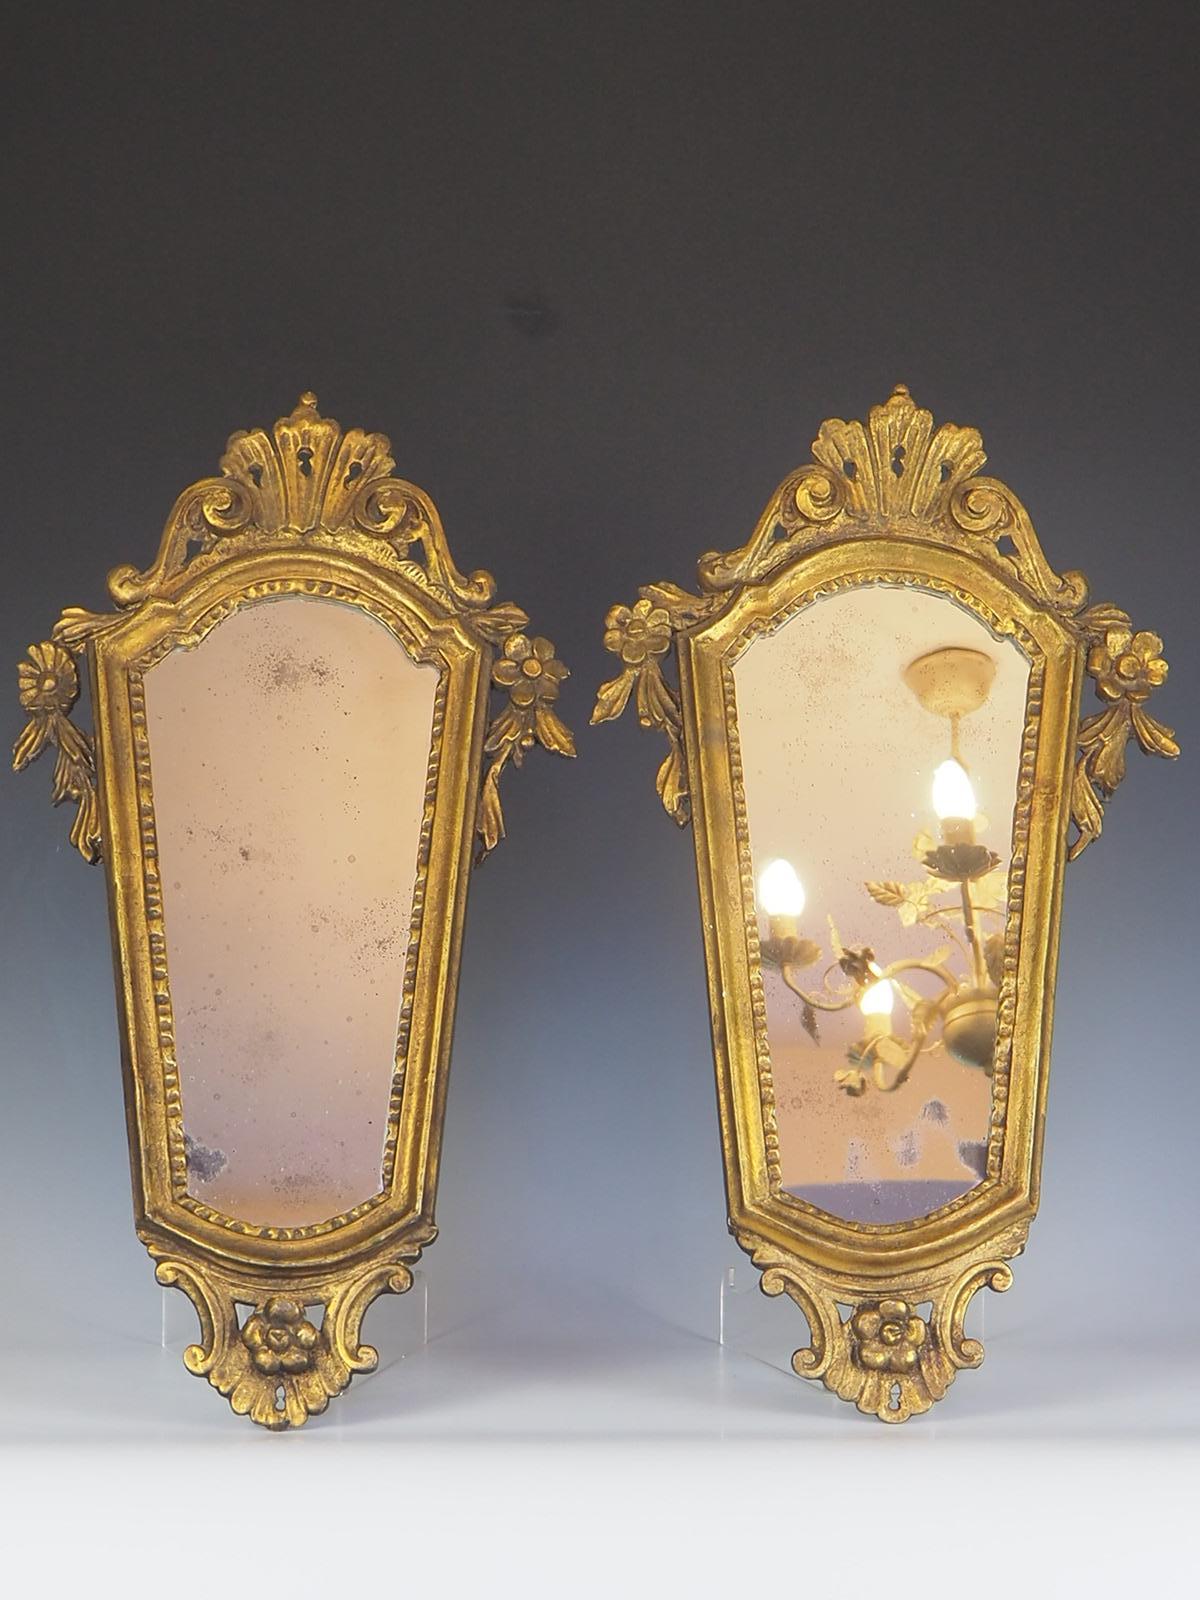 Antique pair of 19th Century Italian Giltwood Mirrors is a stunning addition to any home.

The intricate giltwood frames are highly decorative, featuring ornate carvings and intricate details that are sure to catch the eye. The mirrors themselves